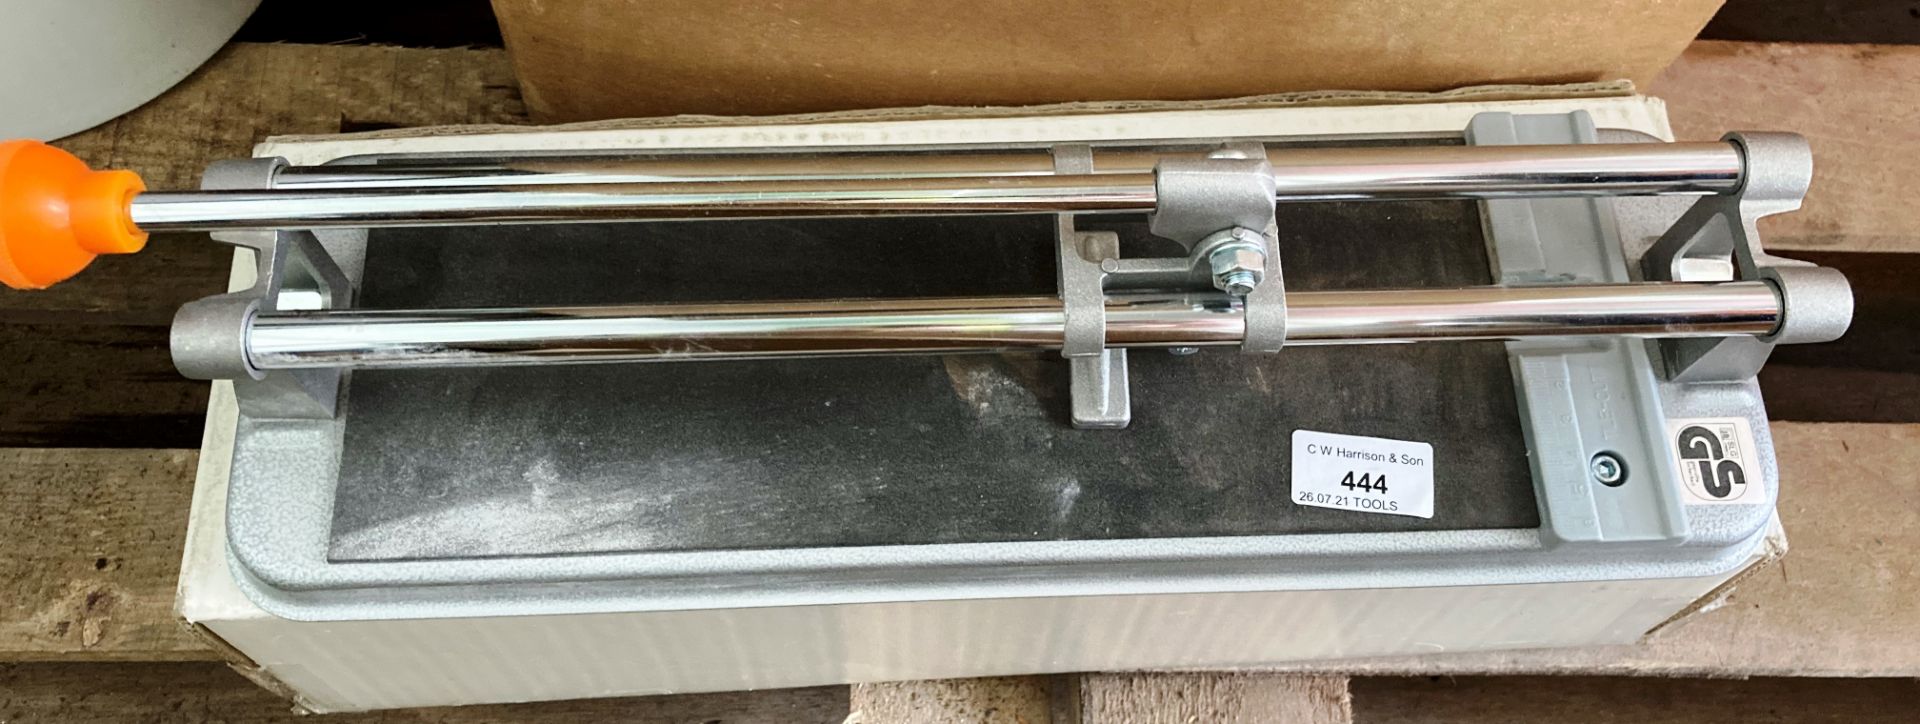 Manual tile cutter and contents to box garden hose and other accessories